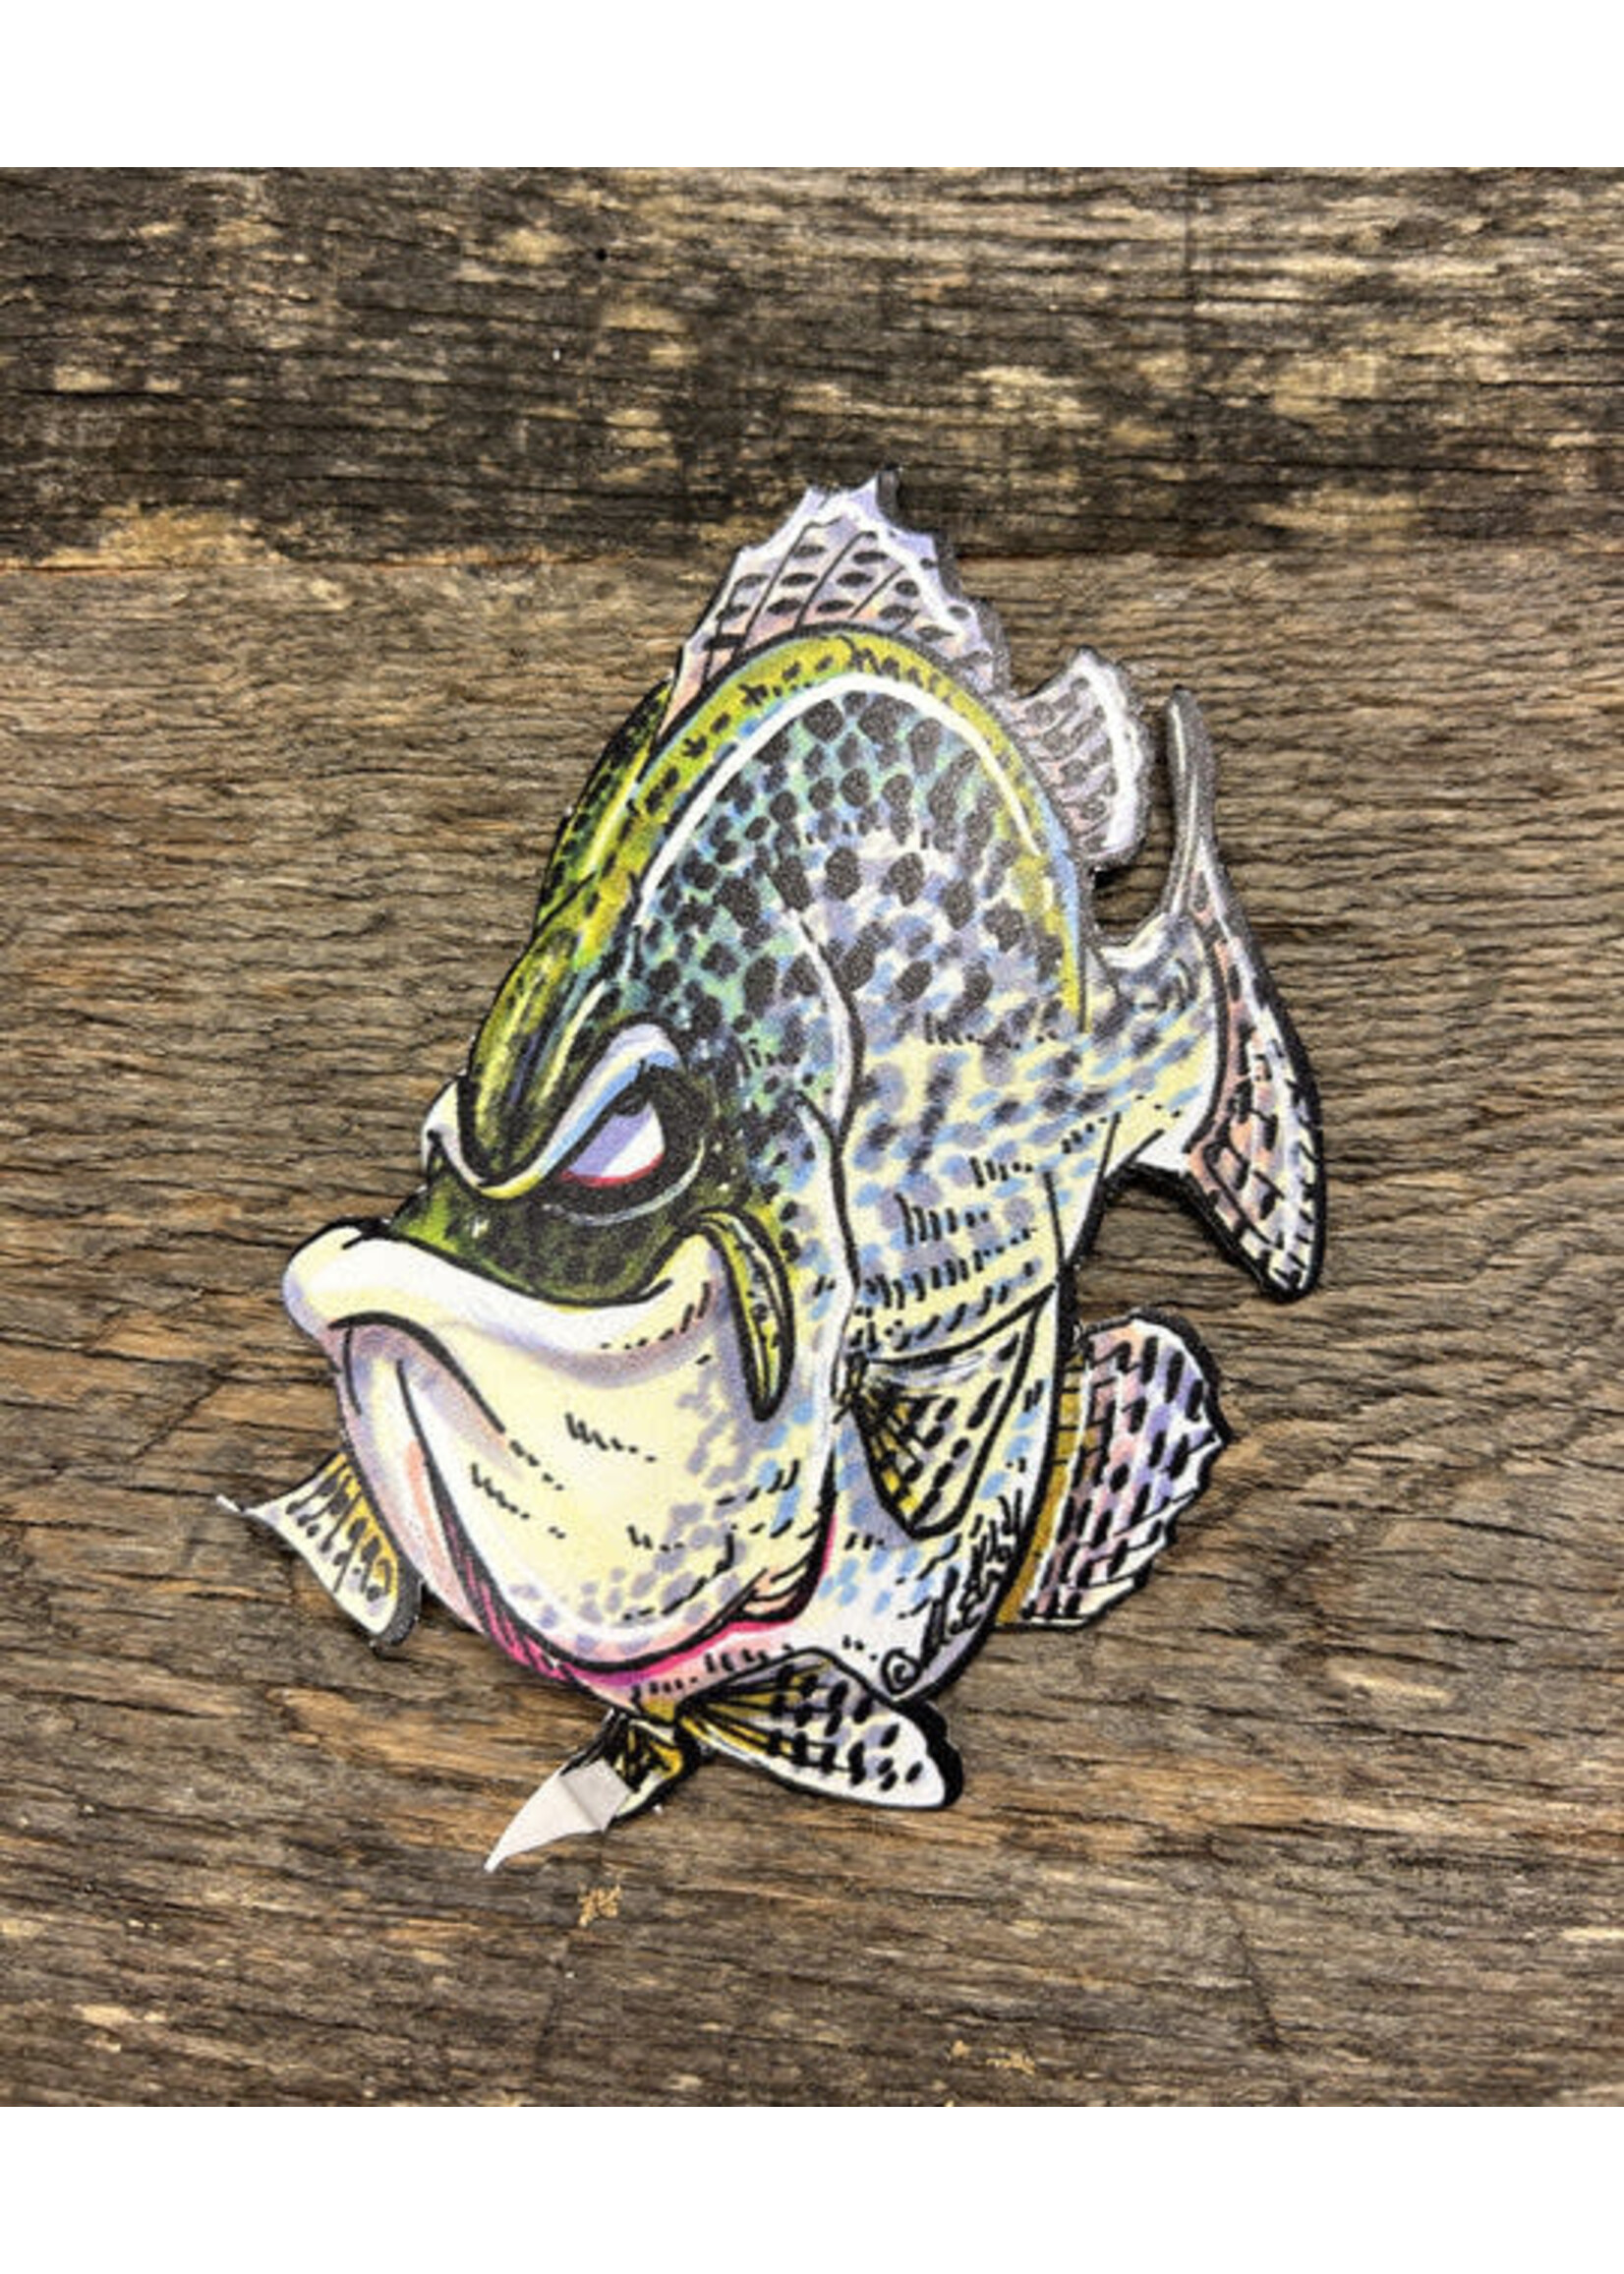 Fishing Complete Fishing Complete Speckles (Crappie) Decal